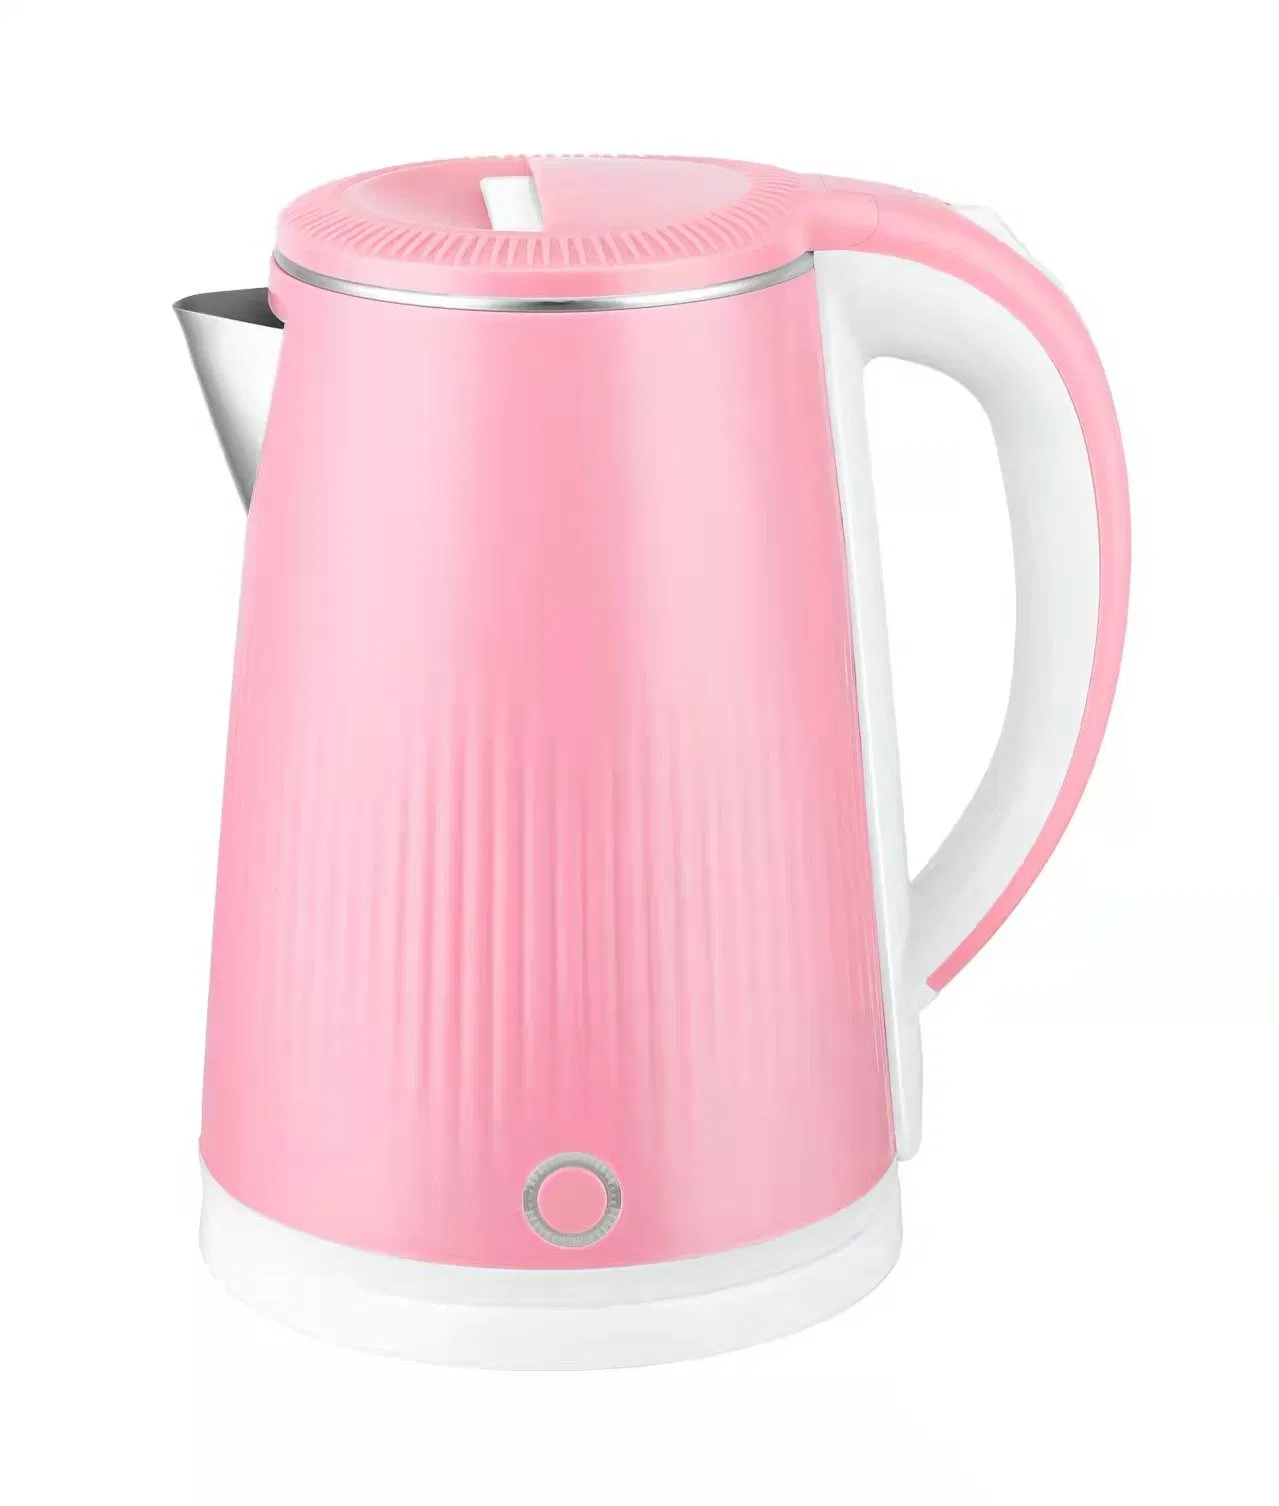 1.8 Liter Double Wall Electric Tea Kettle 201 304 Stainless Steel Electric Kettle Rapid Boiling Kettle